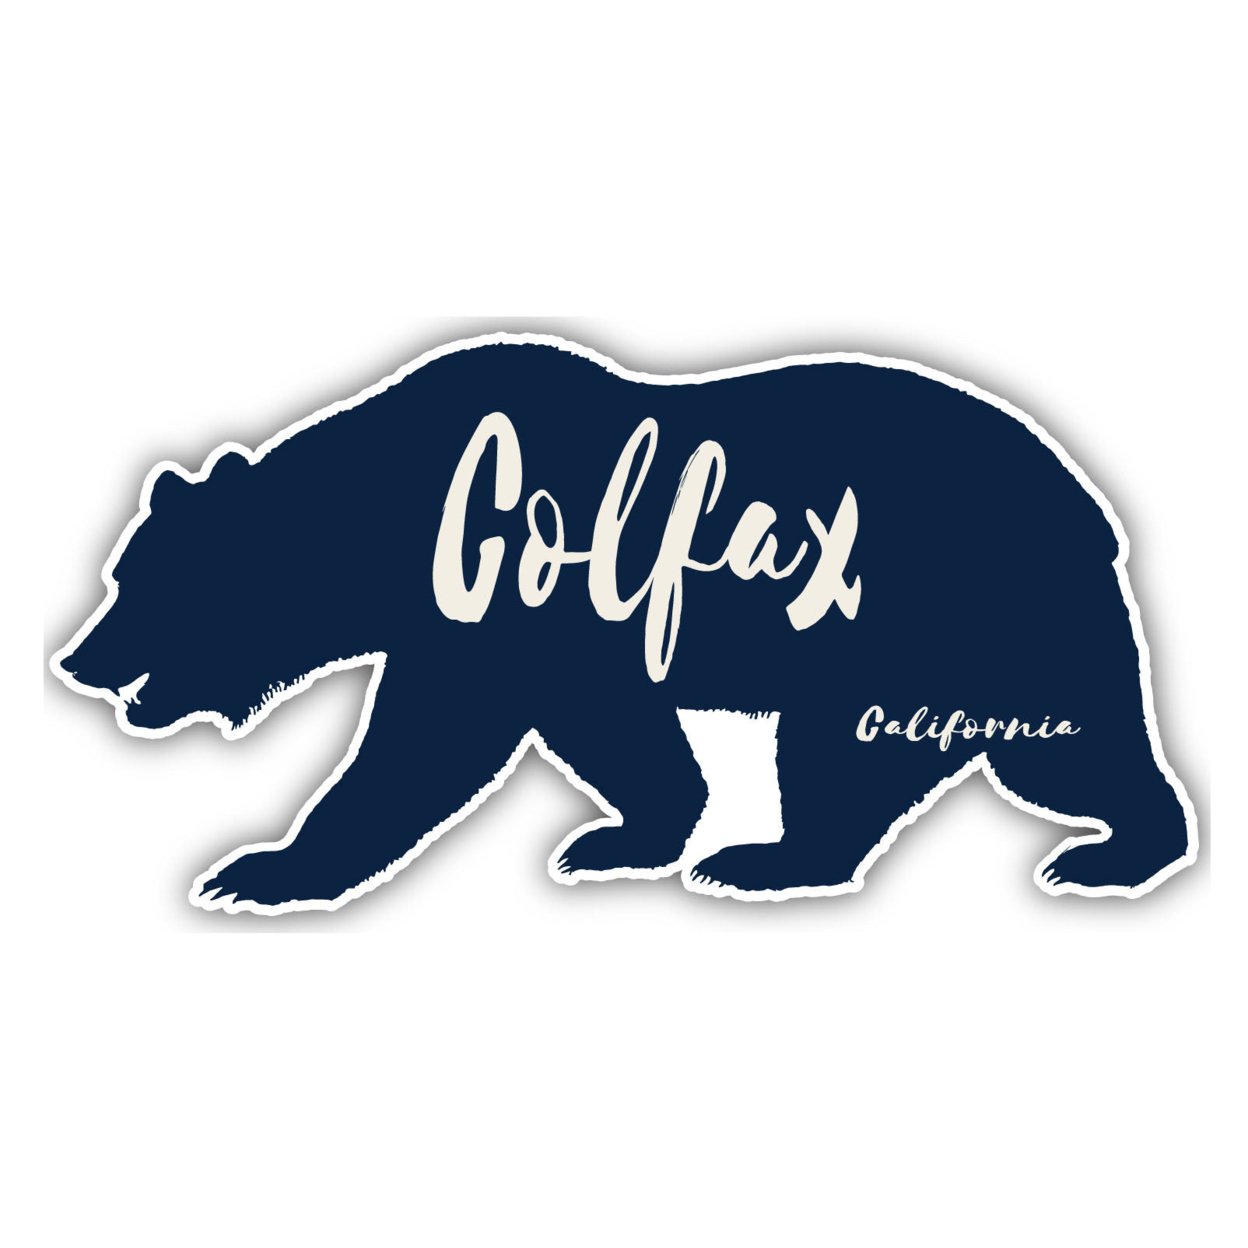 Colfax California Souvenir Decorative Stickers (Choose Theme And Size) - 4-Pack, 6-Inch, Bear